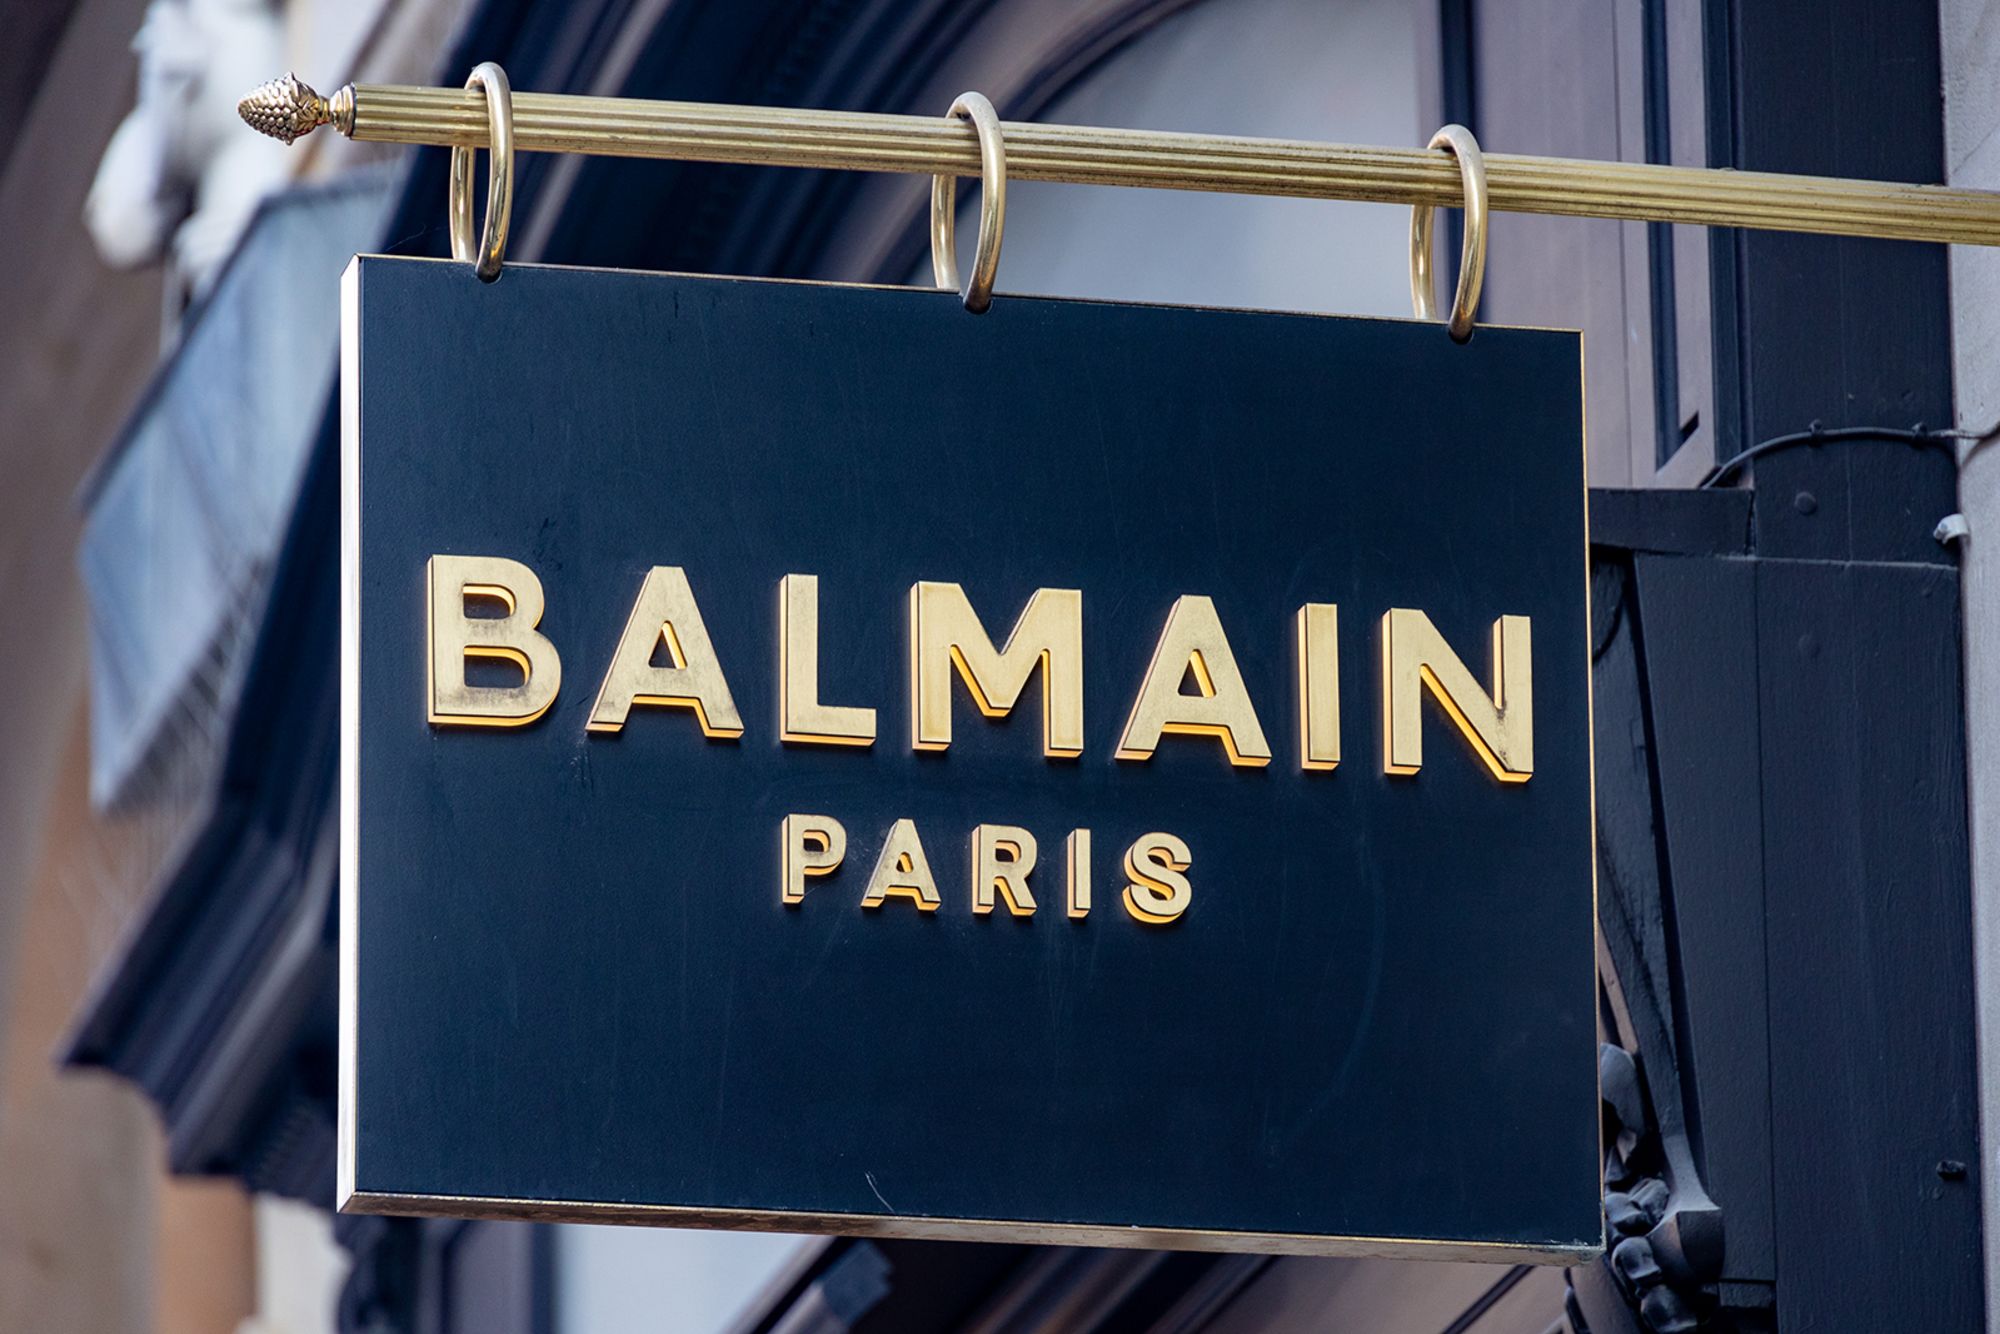 Balmain’s new collection stolen as delivery truck ‘hijacked’ in Paris ...